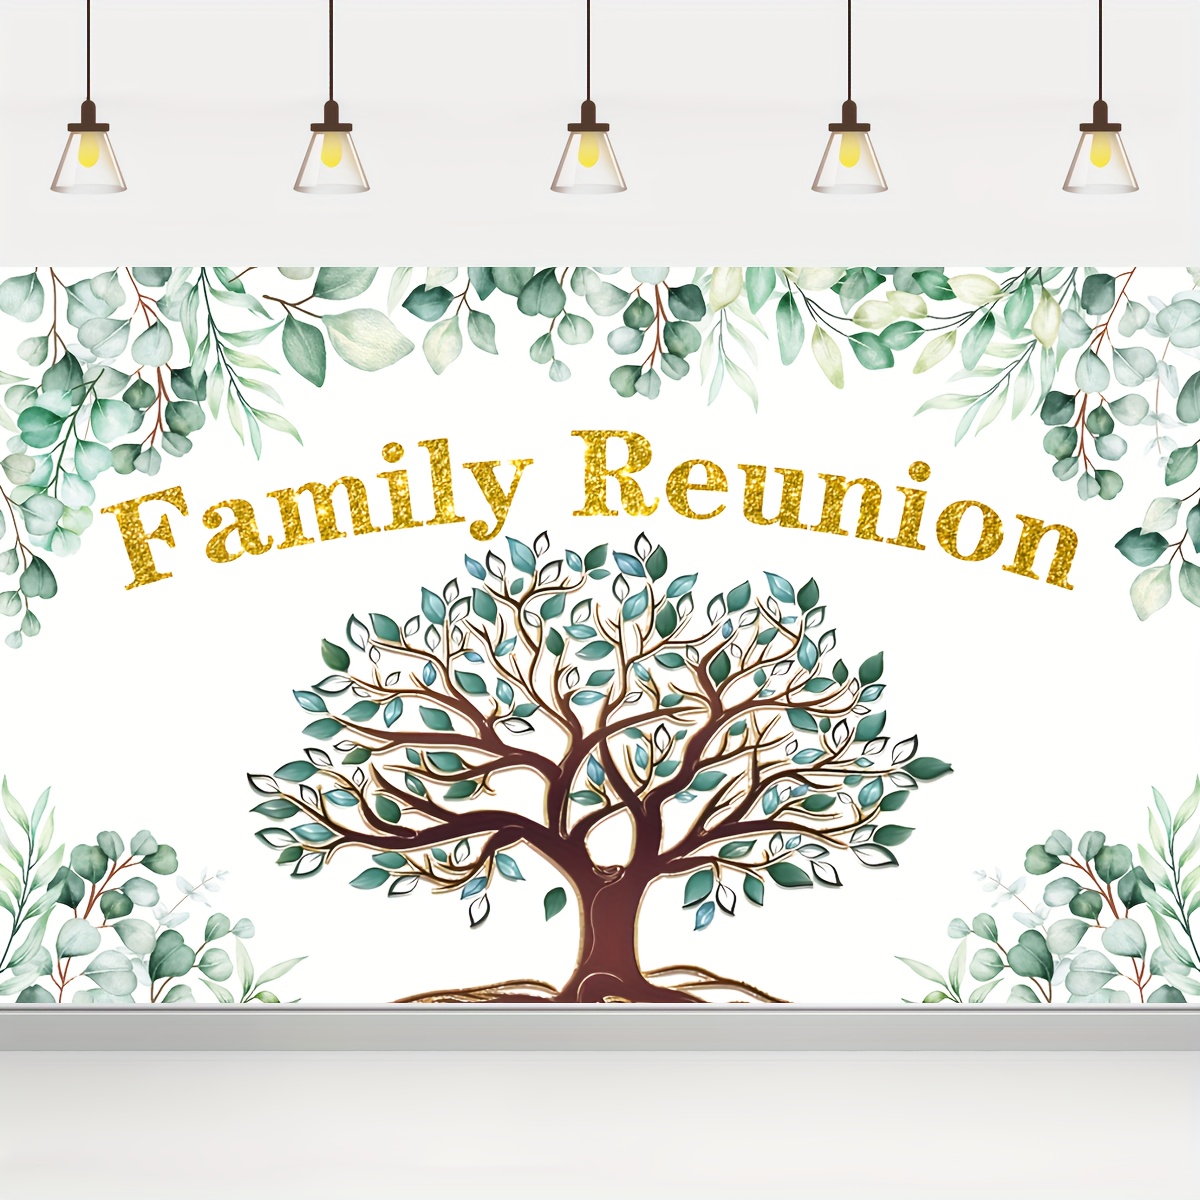 1pc Family Tree Notebook,fill In Your Family Members, Personal Family  History Family Tree Notebook Record